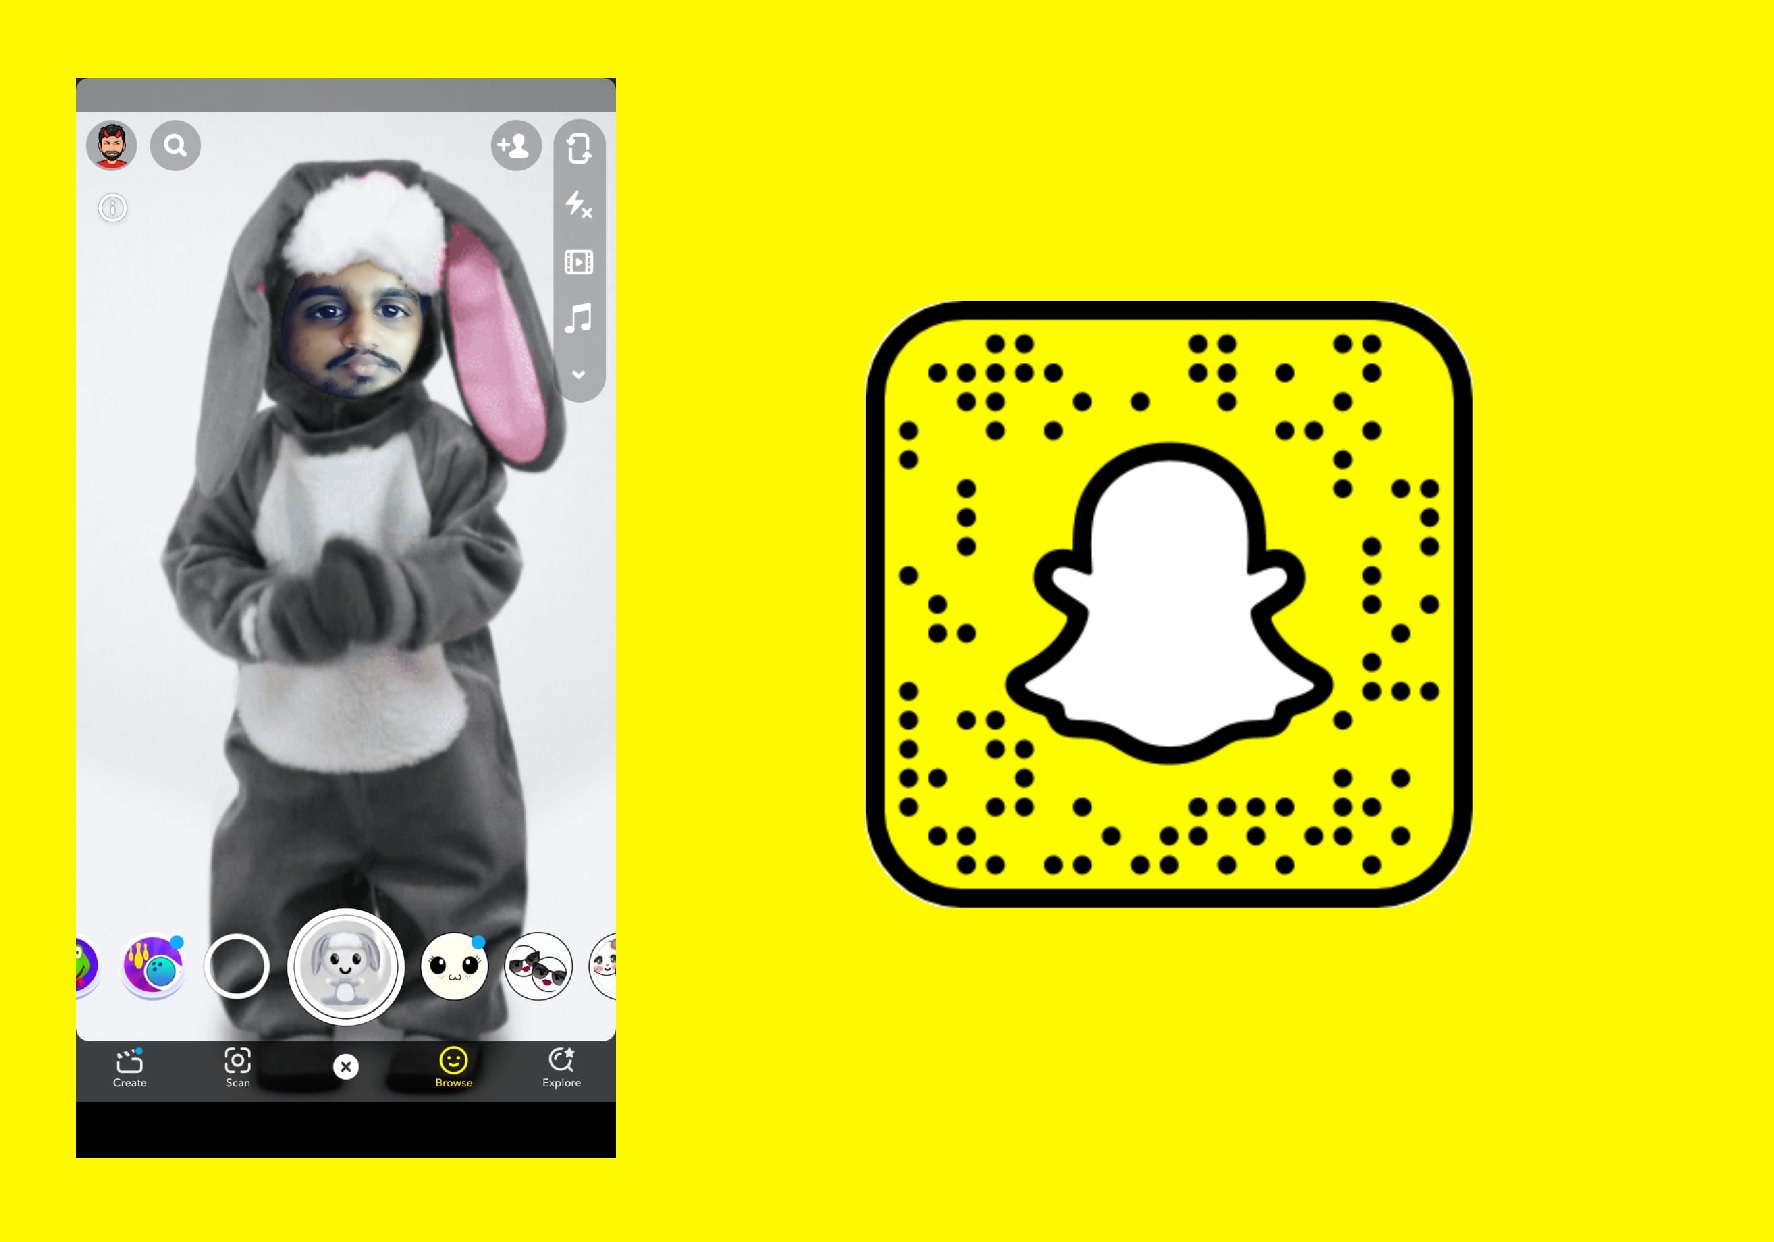 Cutest Snapchat filters - Dancing Bunny